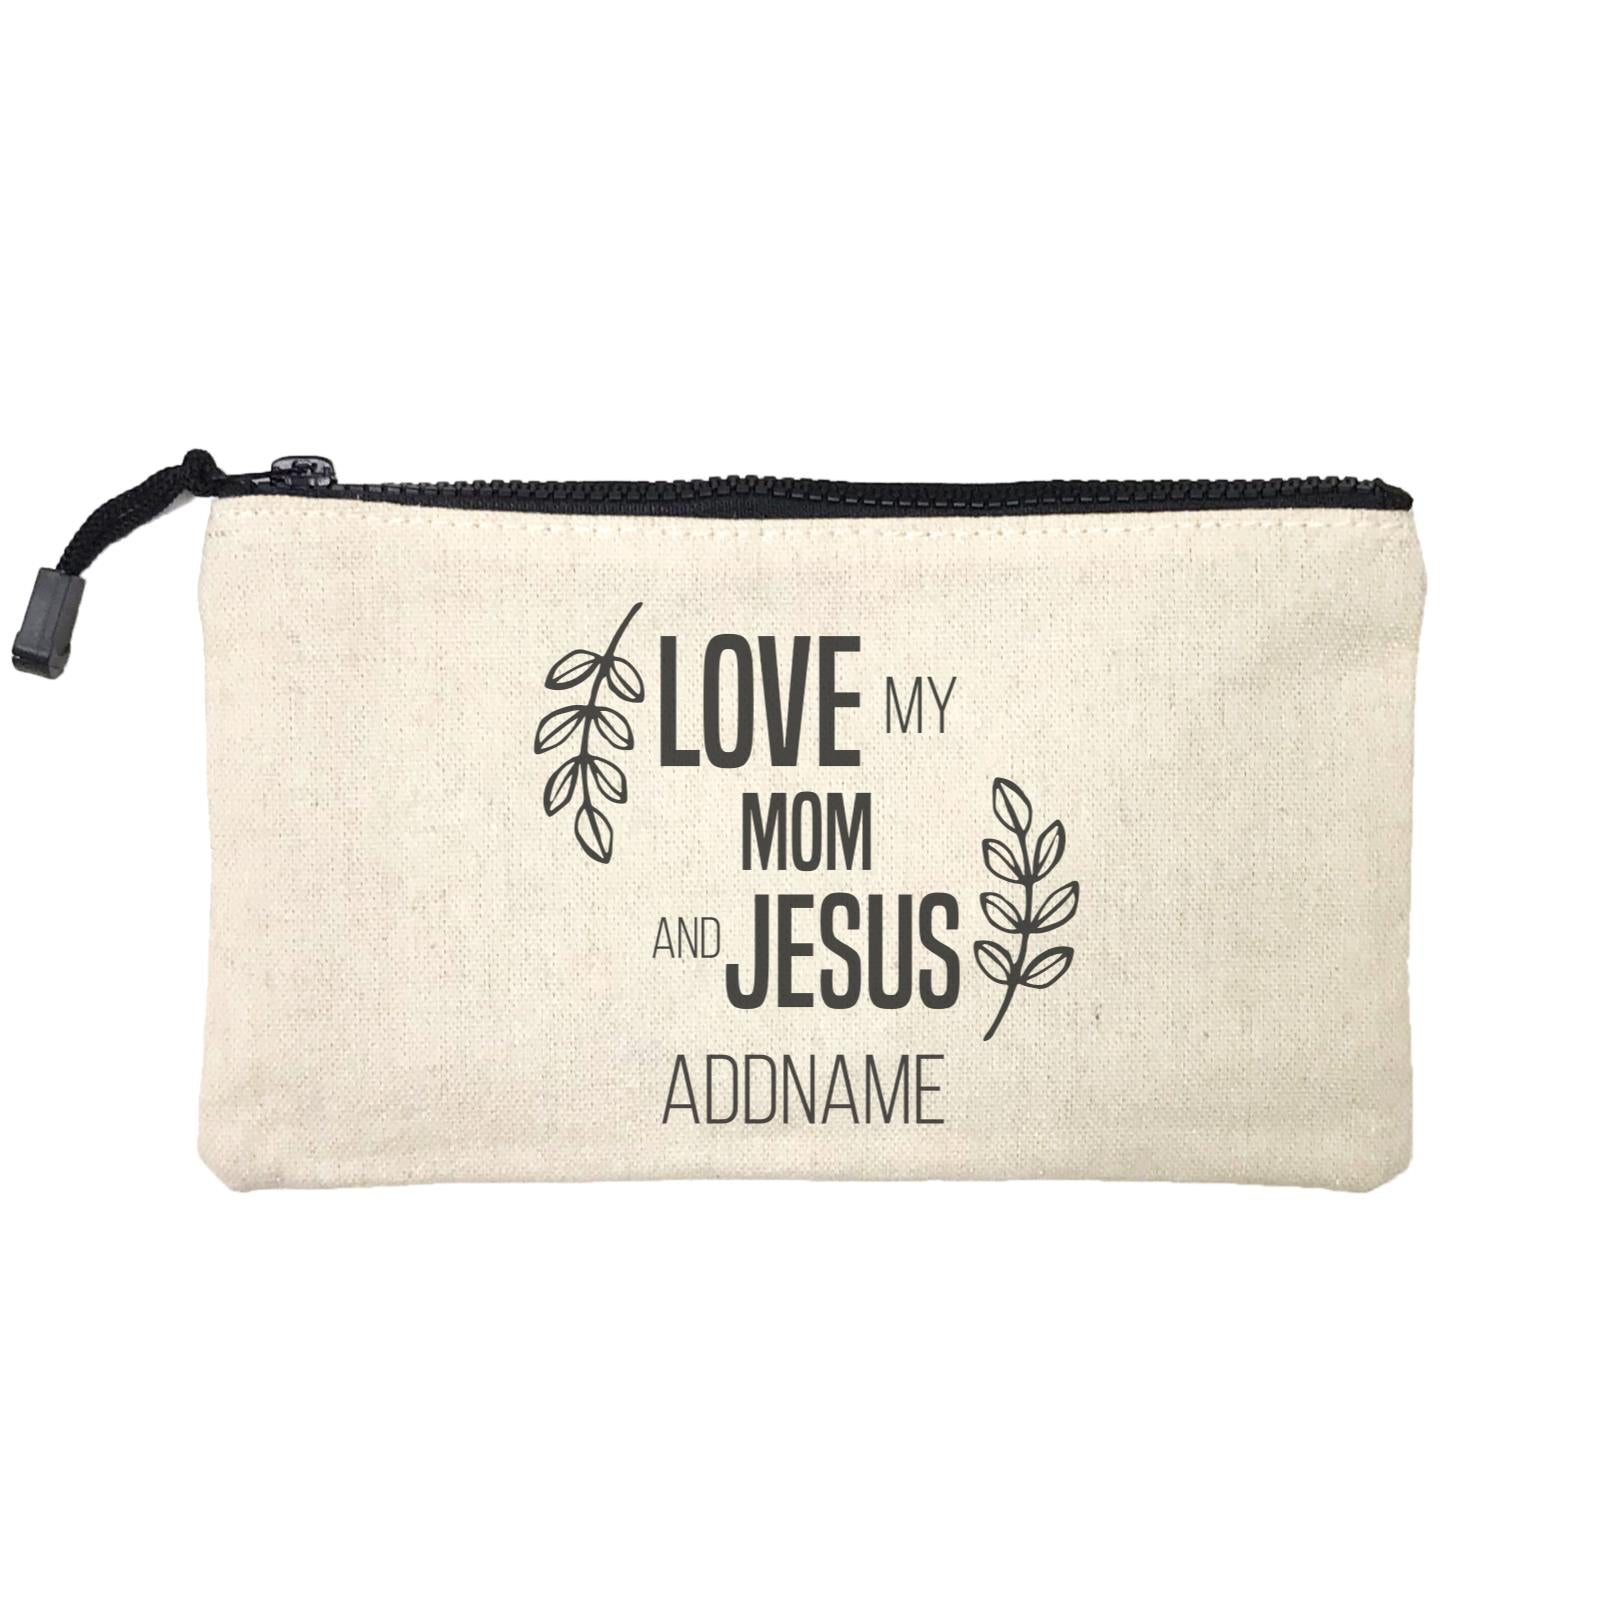 Christian Series Love My Mom And Jesus Addname Mini Accessories Stationery Pouch